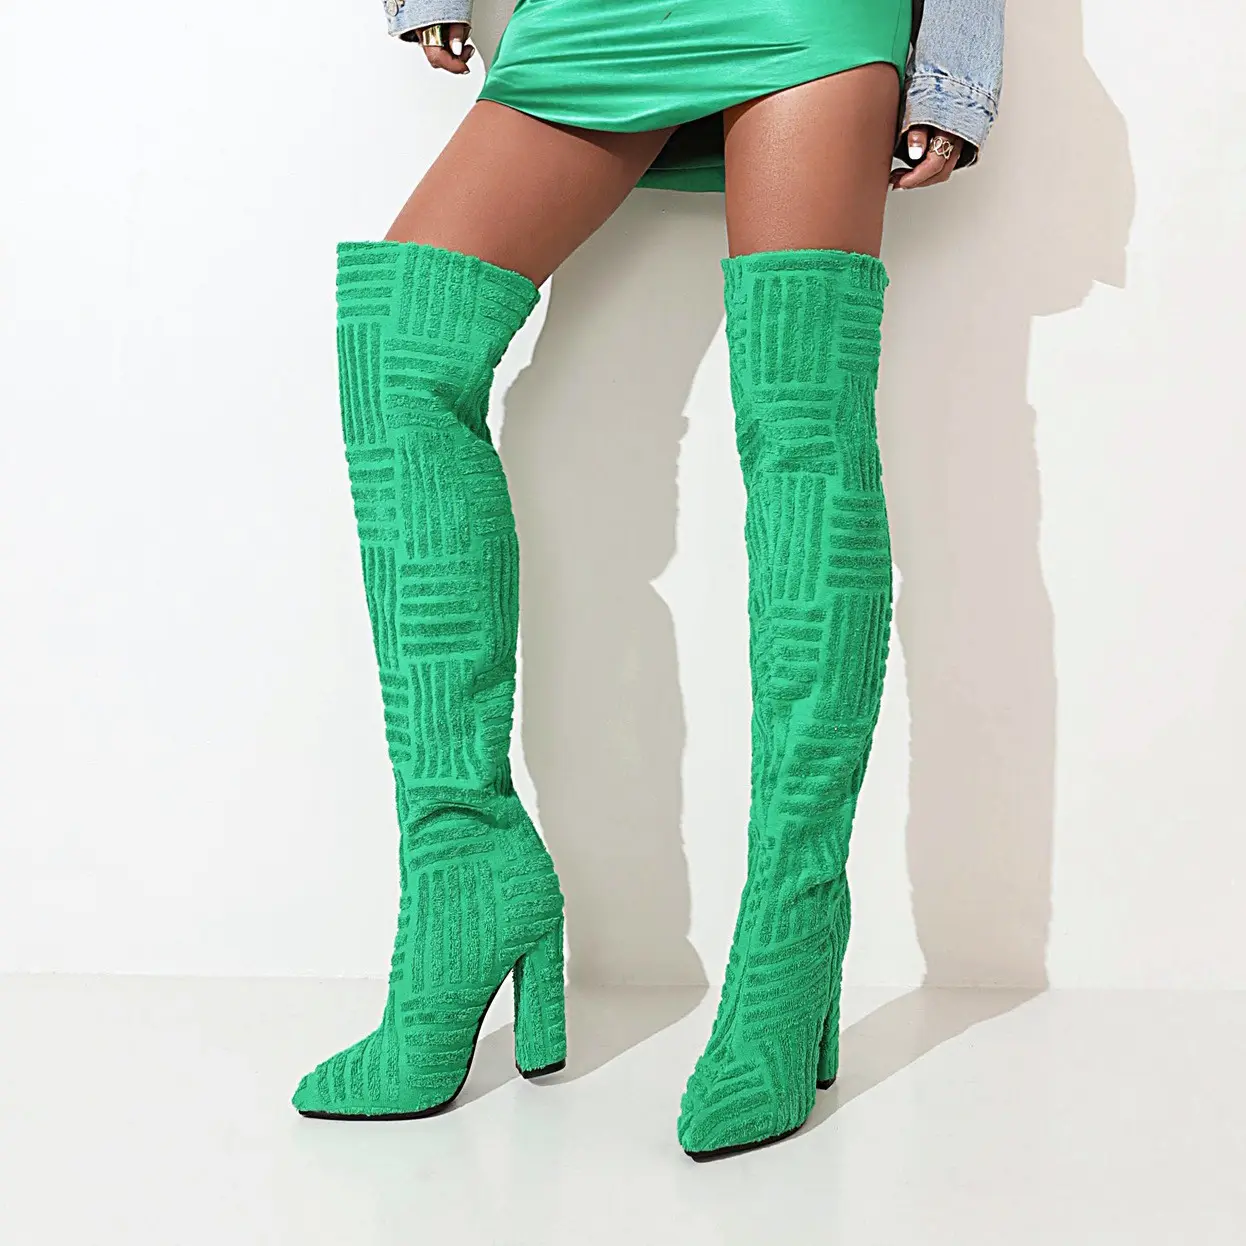 Wholesale Shoes Over Knee Stiletto High Heel Very Long Boots Sexy Candy Color Sock Thigh High Boots for Women